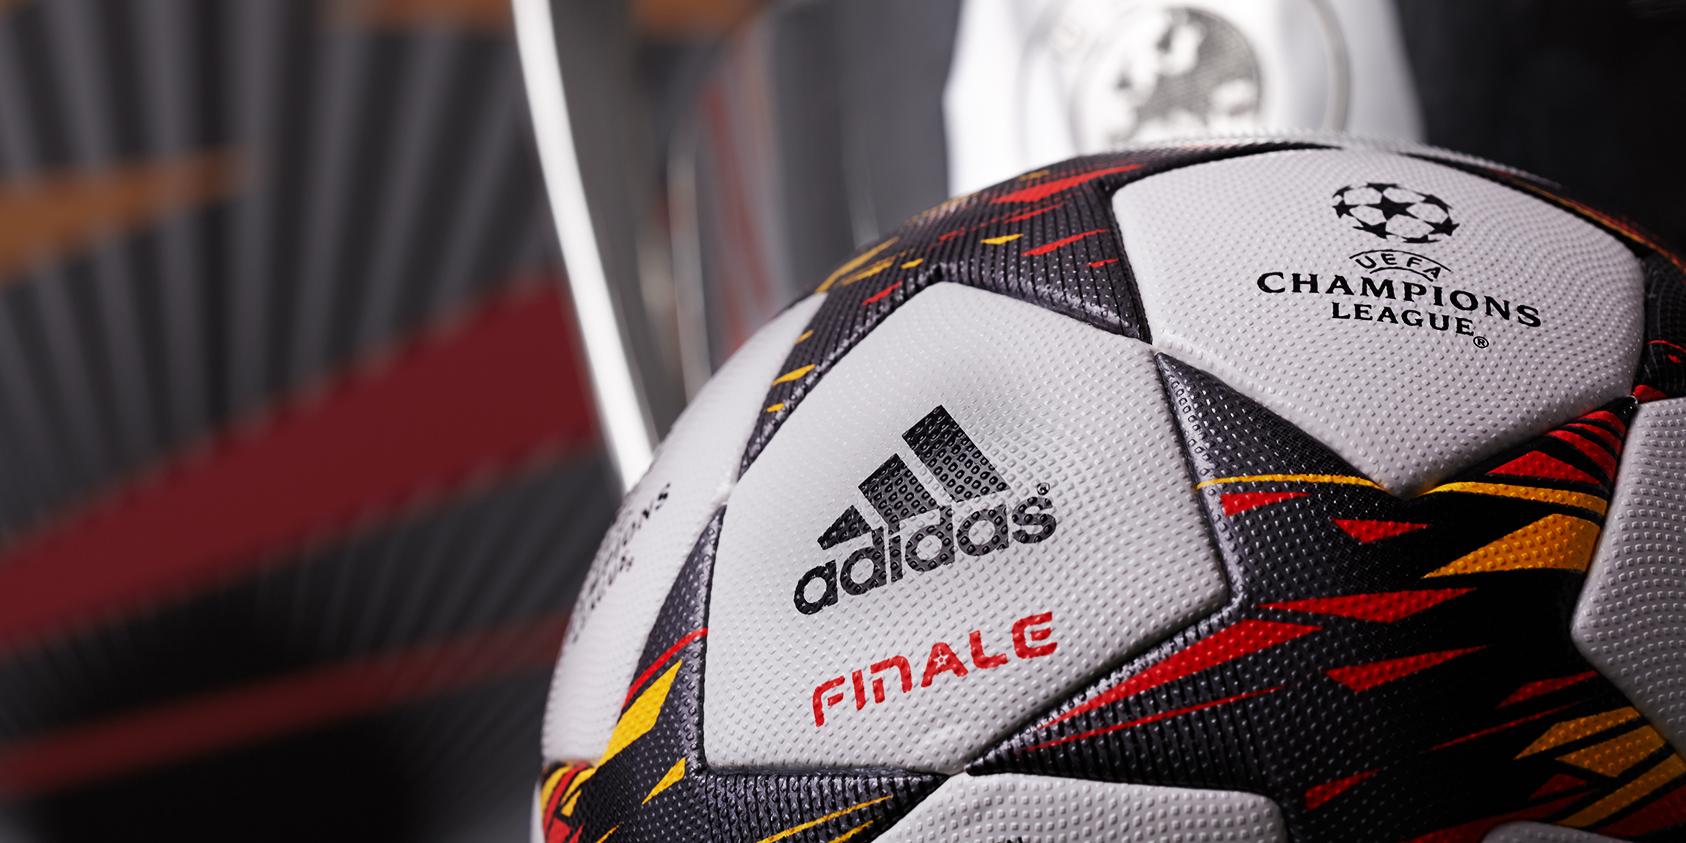 UEFA Champions League on Twitter: "We proudly present the @adidasfootball  #UCL Finale 14, a match ball that's ready to make history! #UCLdraw  http://t.co/981HXFoXzW" / Twitter